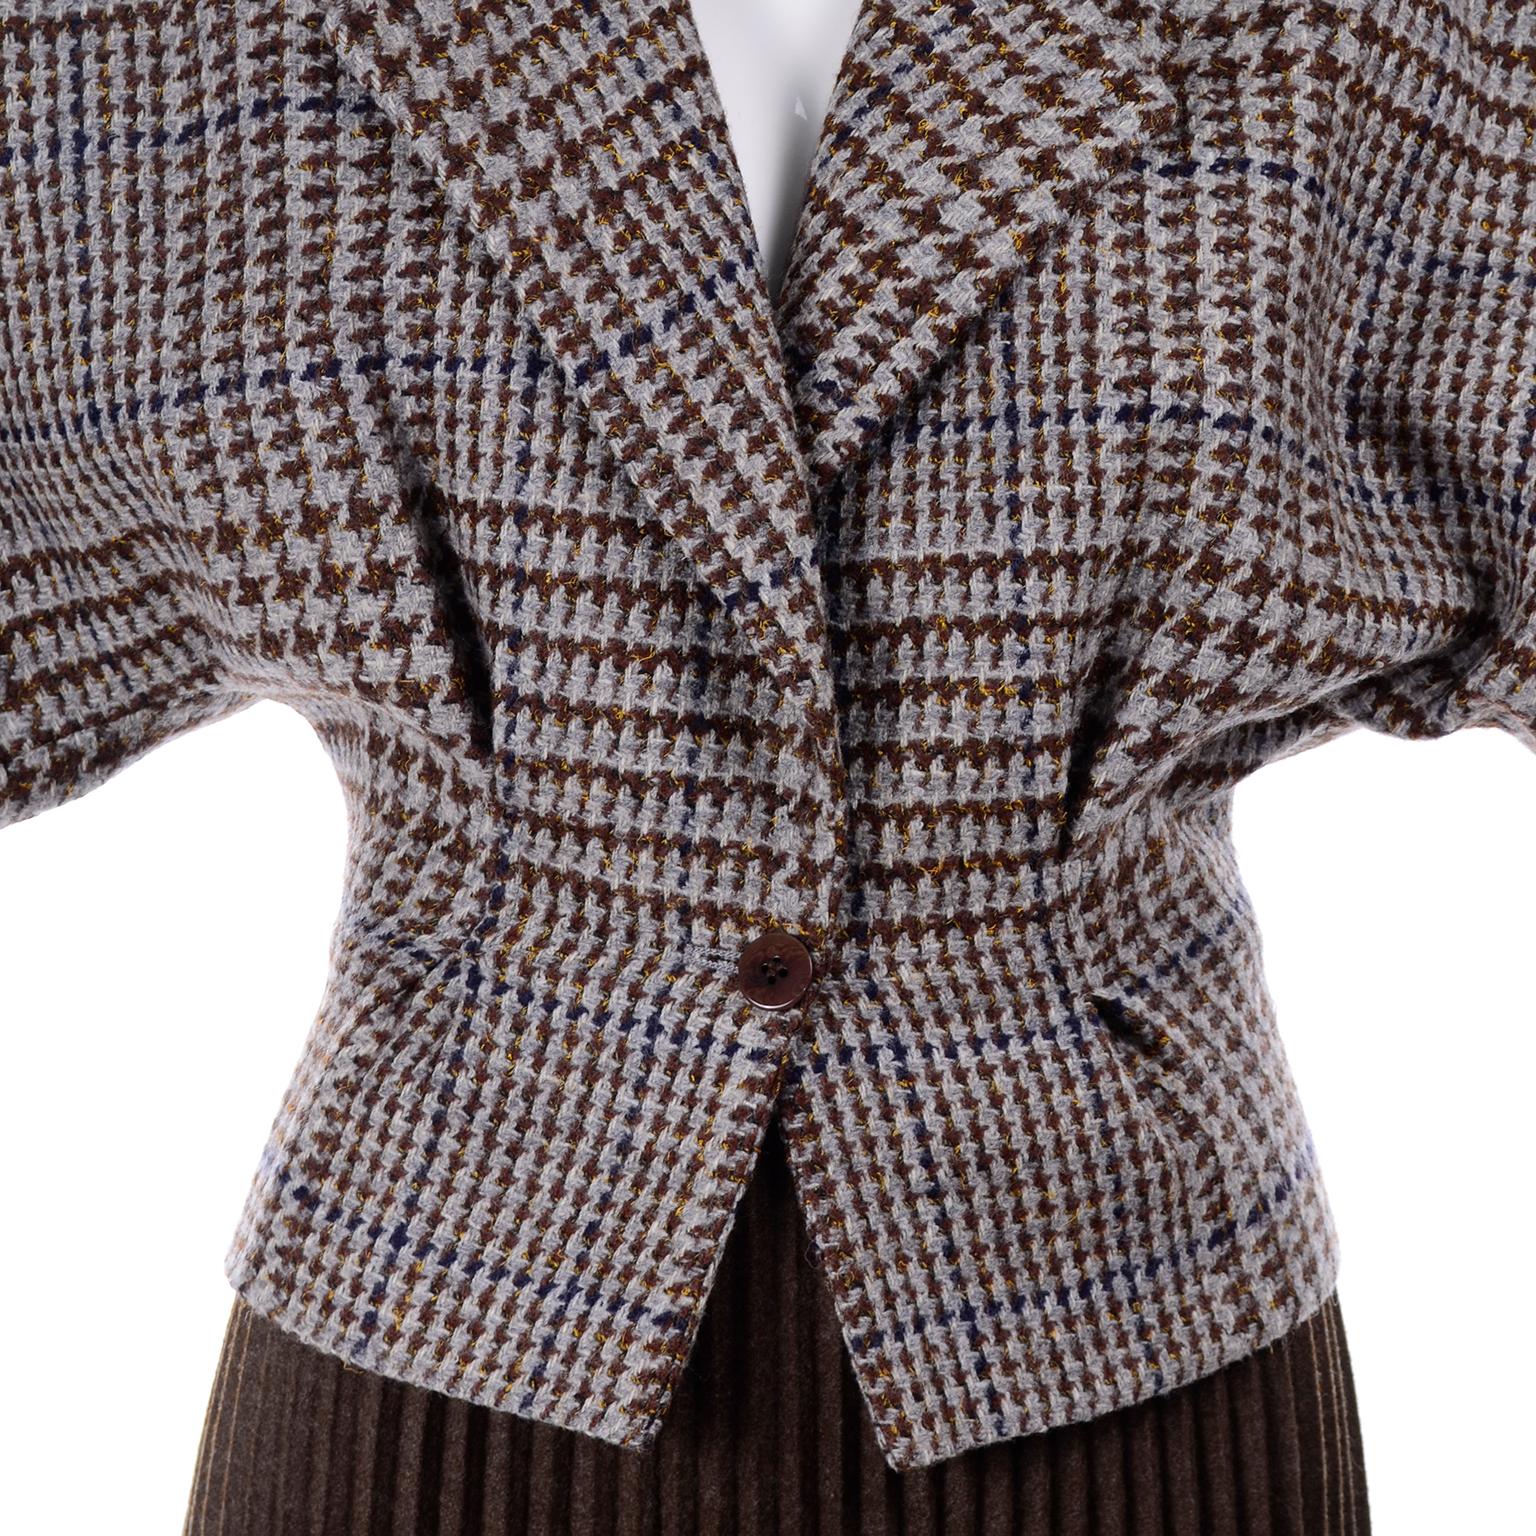 Black Giorgio Armani 1980s Cropped Houndstooth Jacket W Pleated Brown Wool Skirt Suit